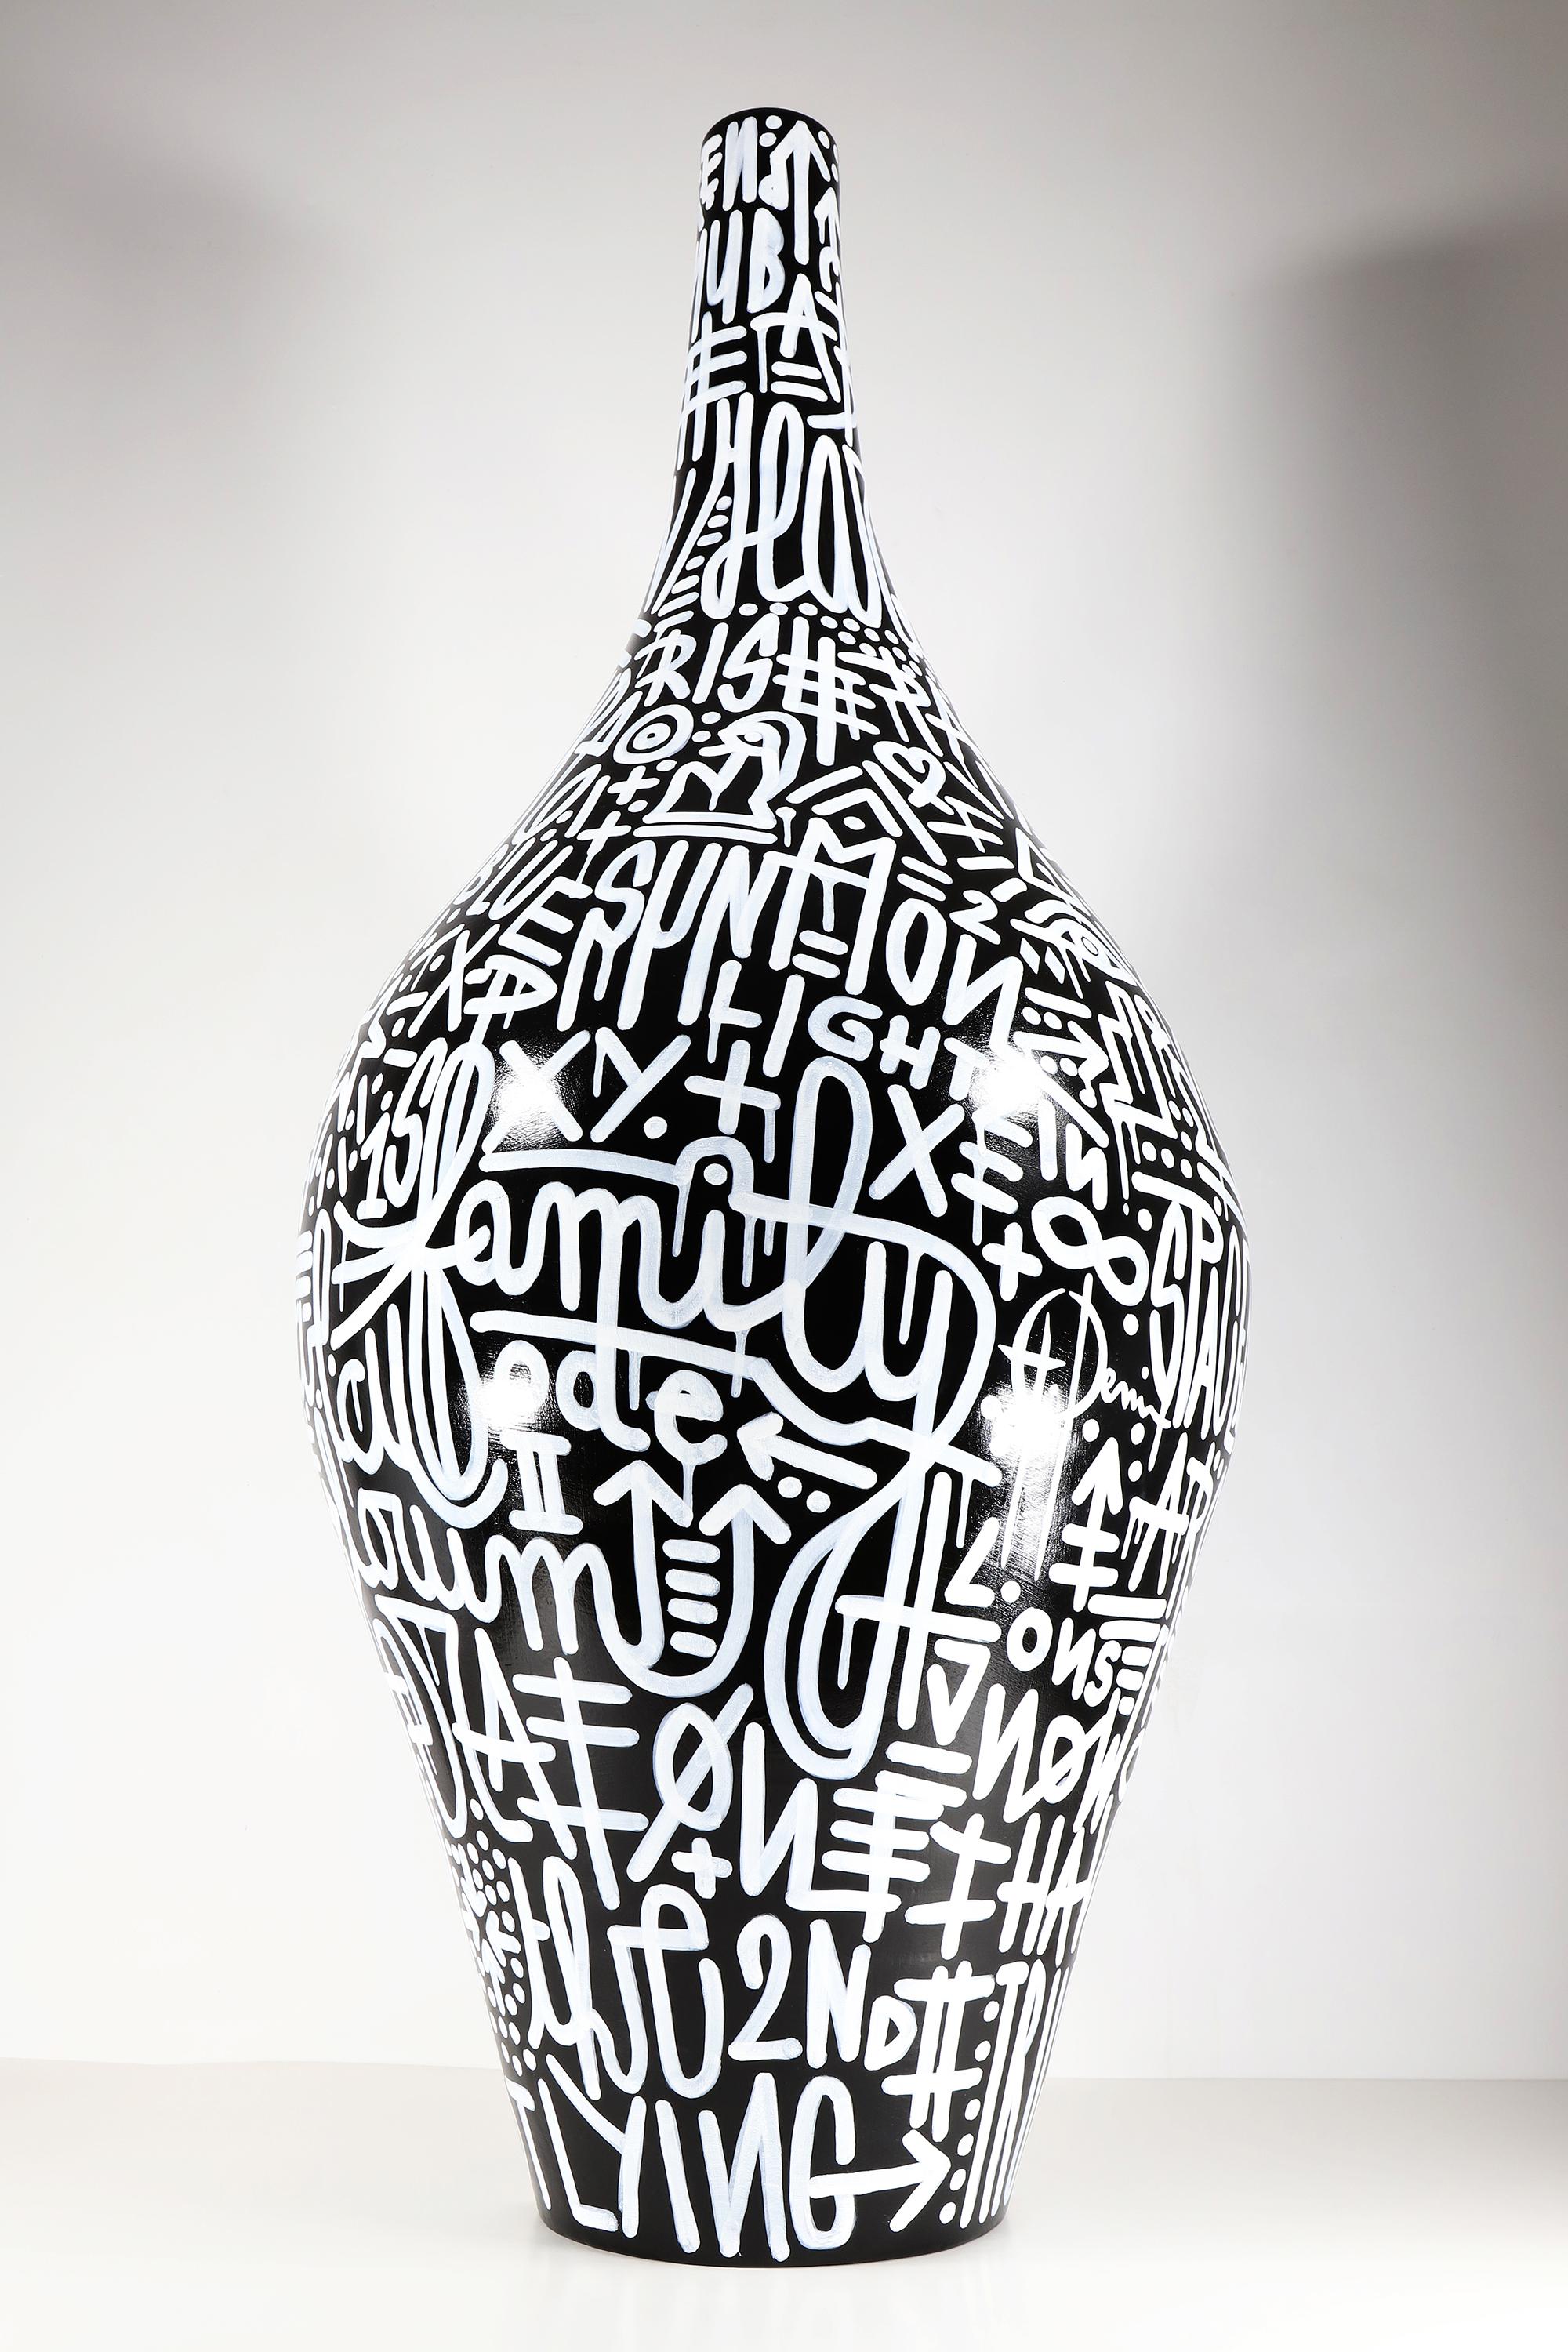 Grégoire Devin Abstract Sculpture - 'Infinity' Acrylic Painted Lettering on Ceramic Sculpture